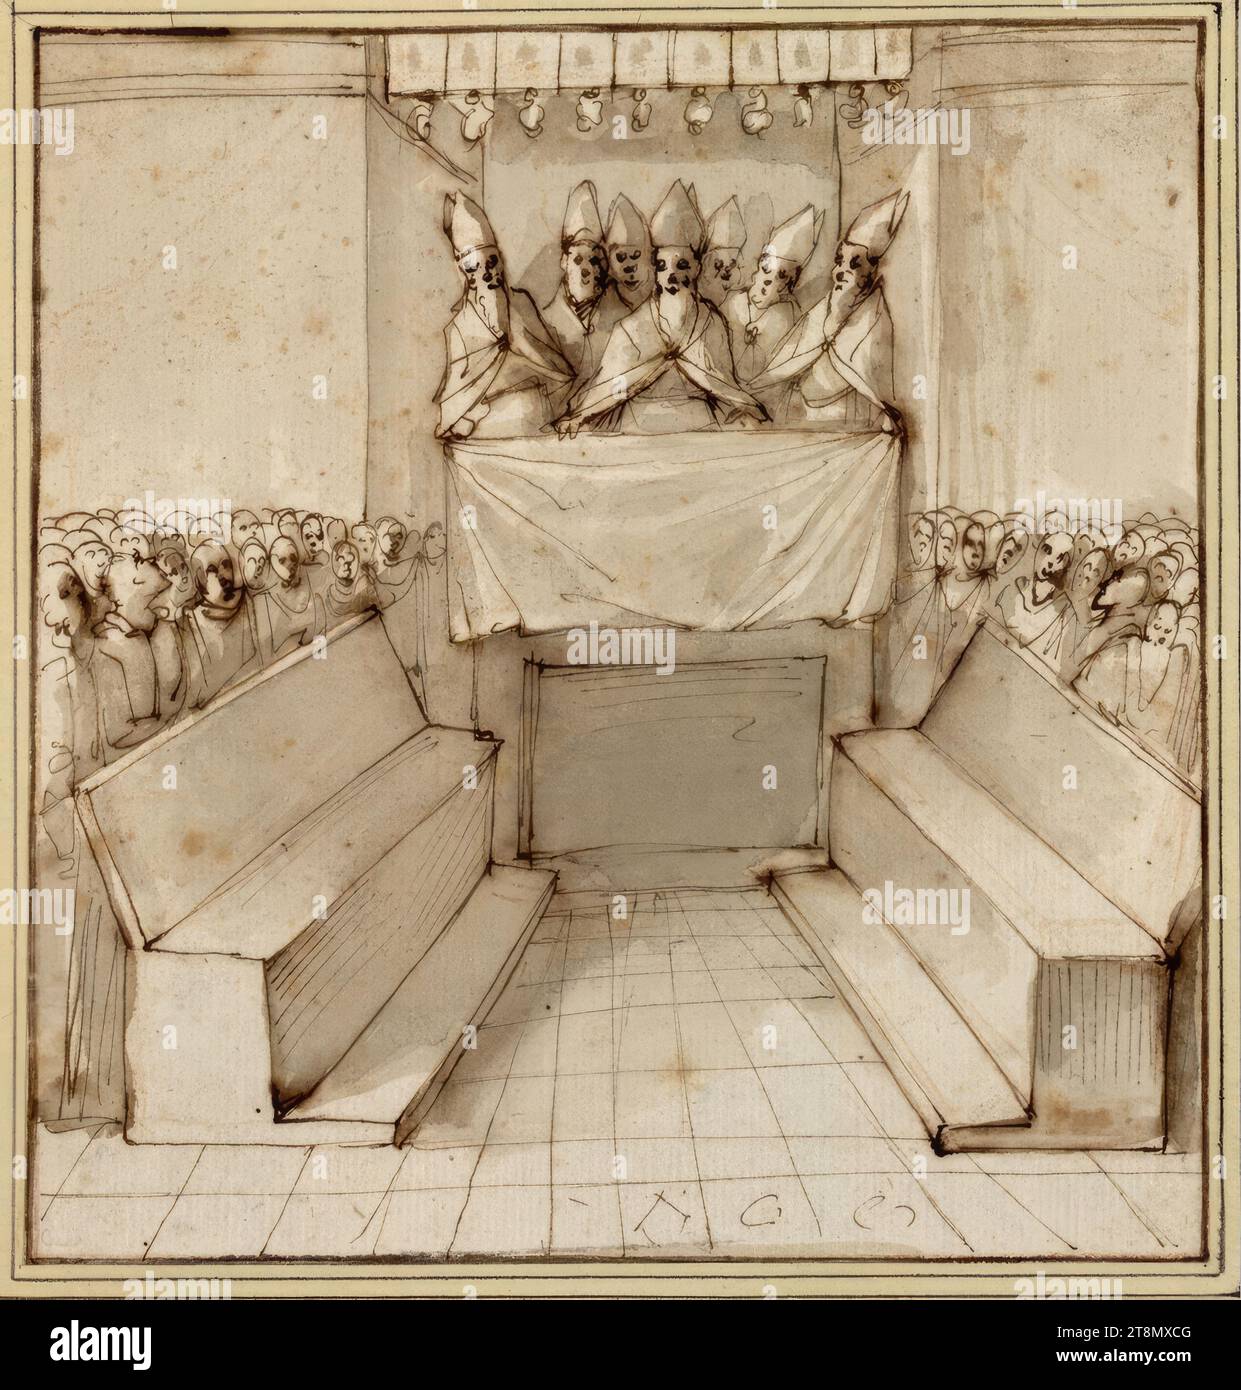 The bishops in the pulpit with empty benches in front of the people, Domenico Cresti called Passignano (Badia a Passignano (Tavarnelle Val di Pesa) 1559 - 1638 Florence), drawing, pen, ink, washed, 16.4 x 15.9 cm, l.b. Duke Albert of Saxe-Teschen Stock Photo